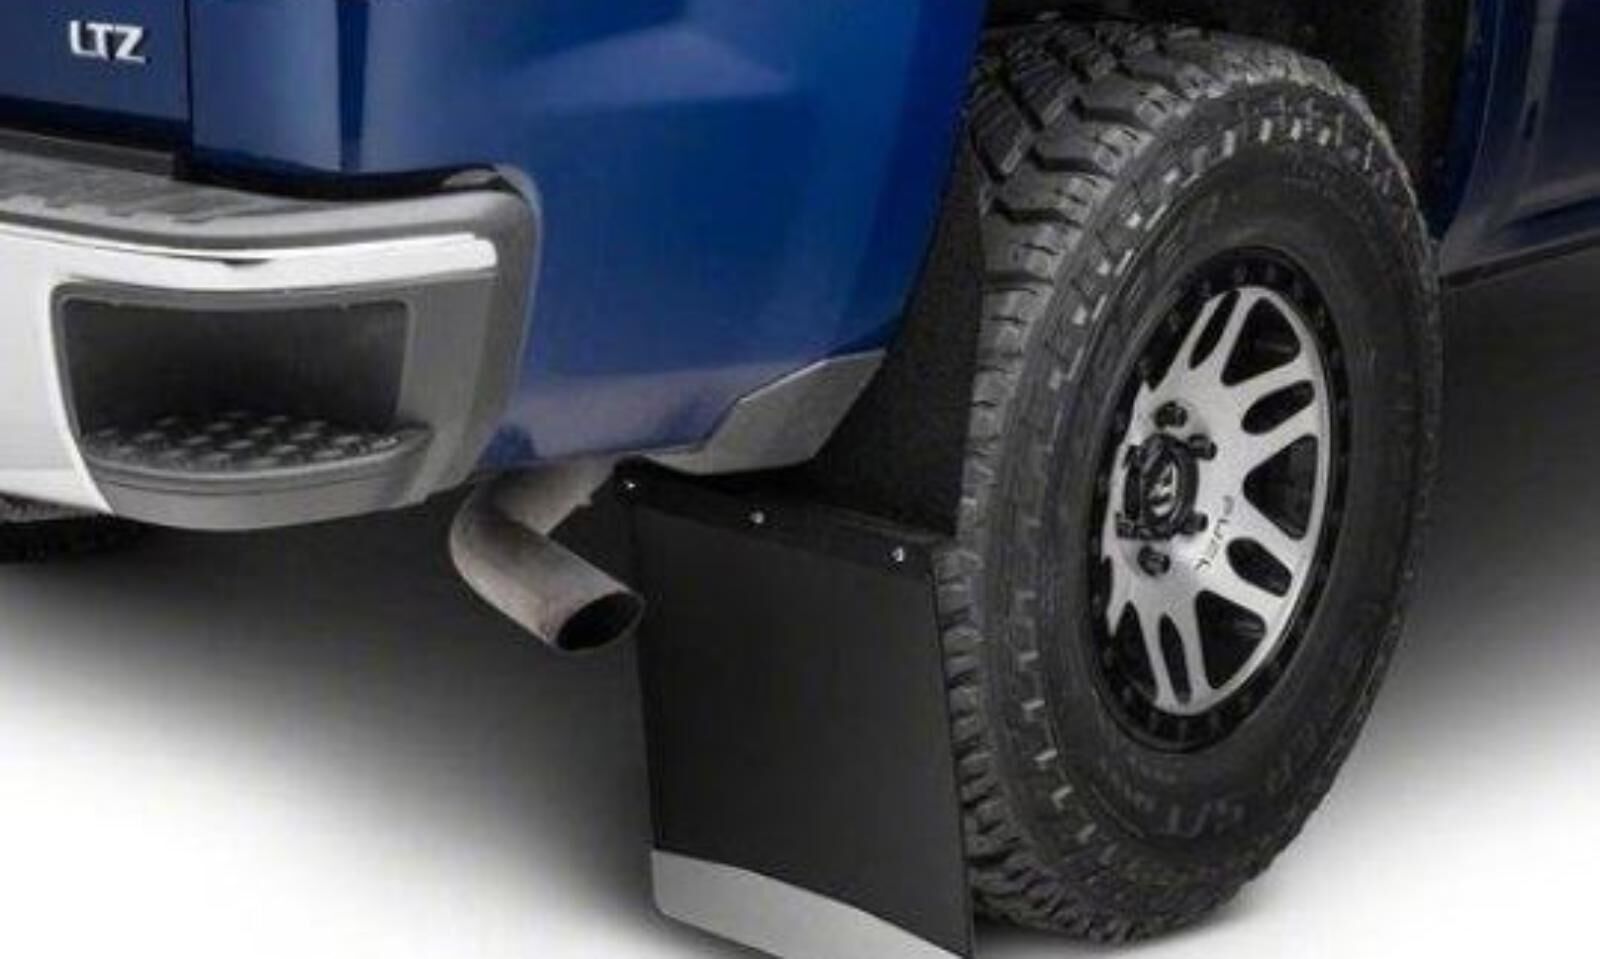 How to Find Effective Car Mud Flaps to Keep Your Vehicle Dirt-free?